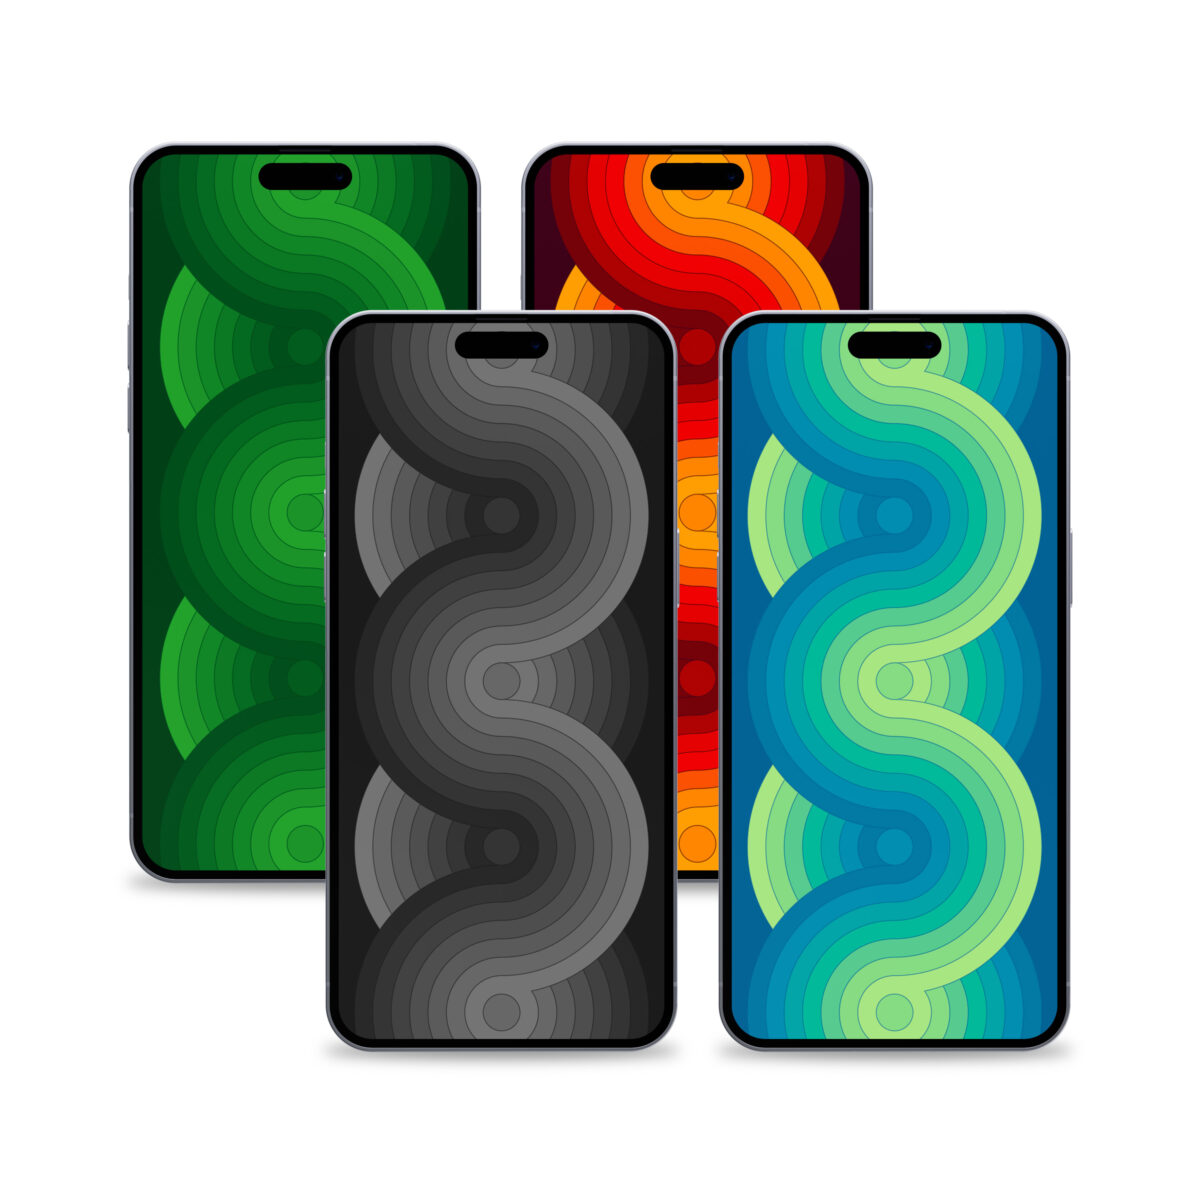 Four phones with Curls digital wallpaper in different colors